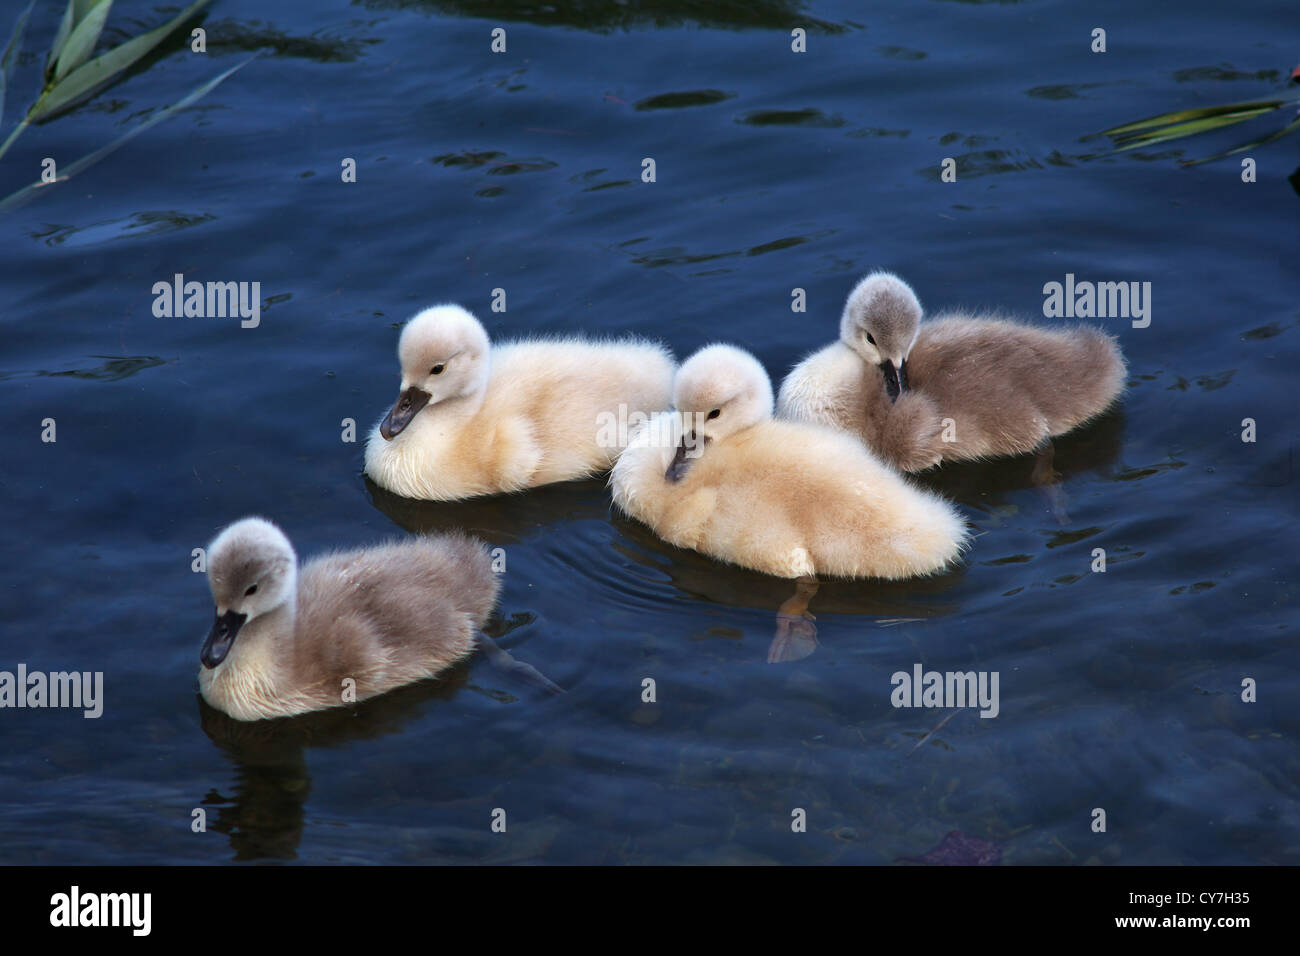 Four swan cubs carefree swimming in clear blue water Stock Photo